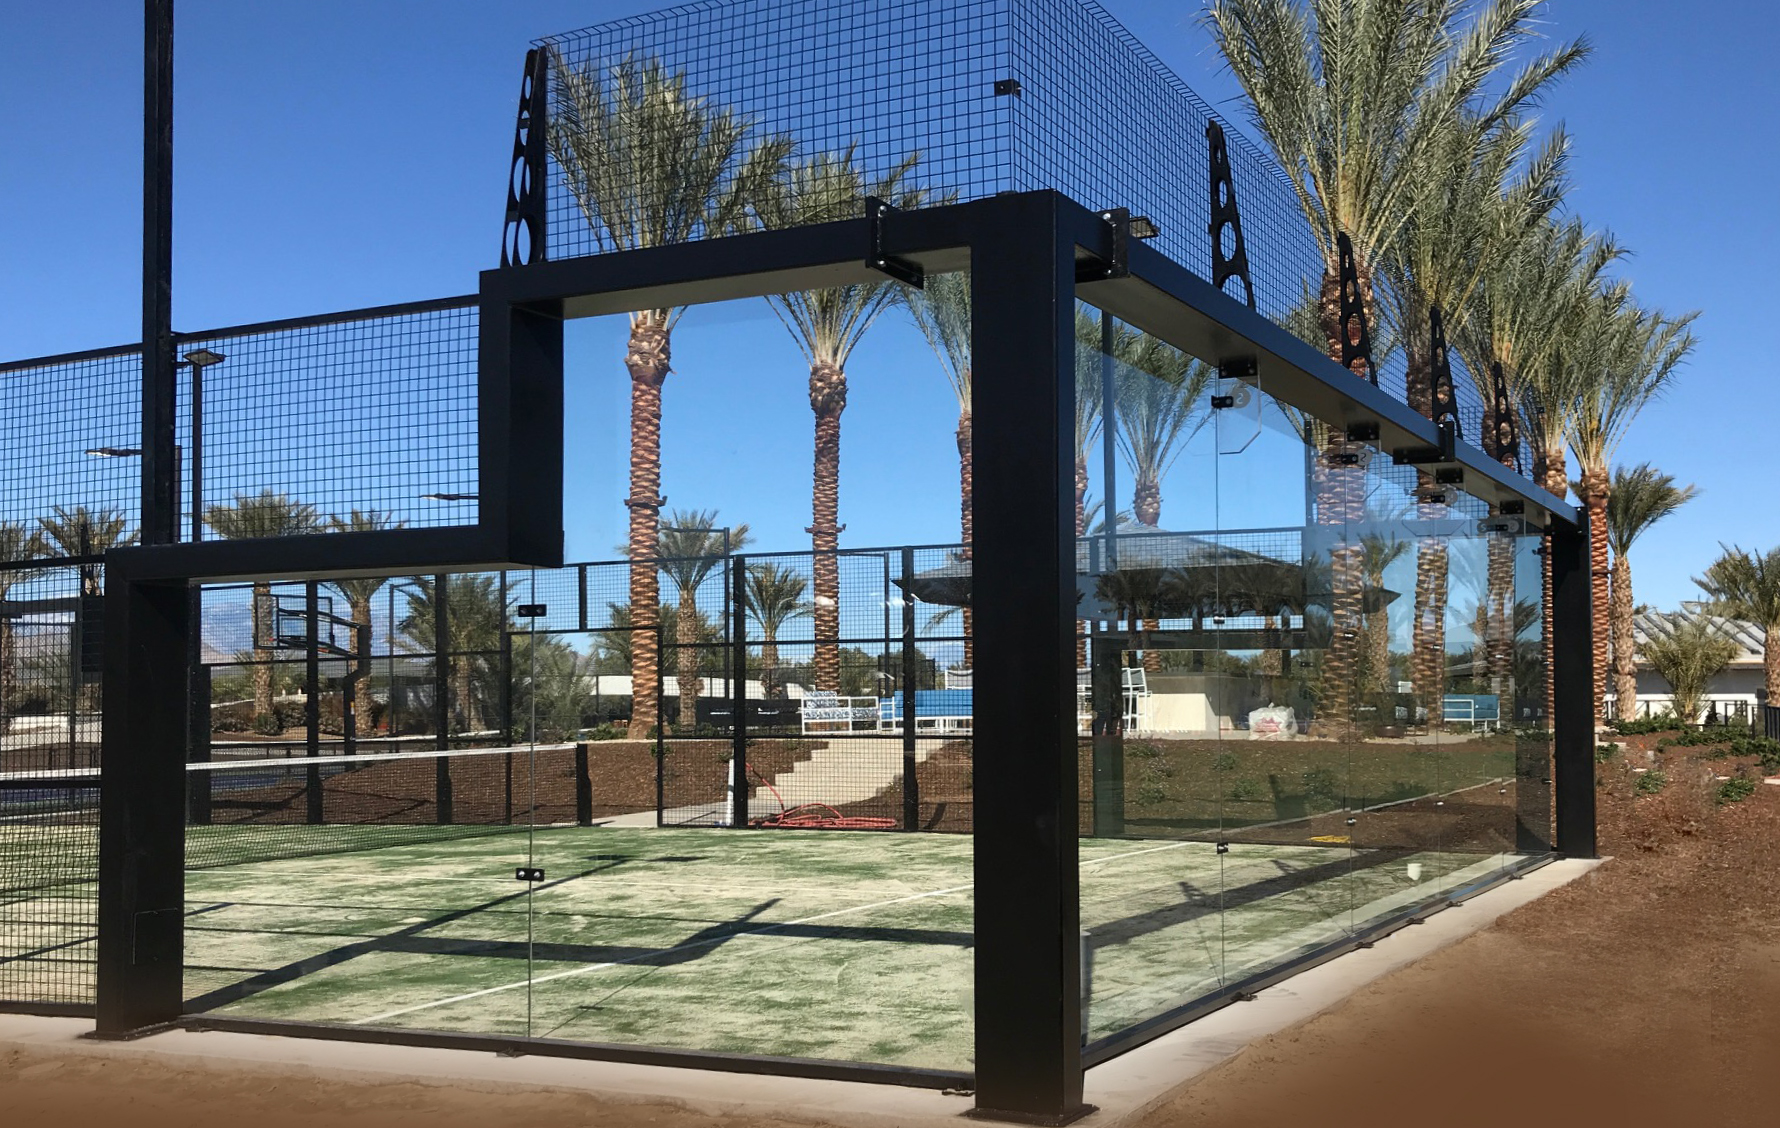 Paddle Tennis Los Angeles - Padel in the USA